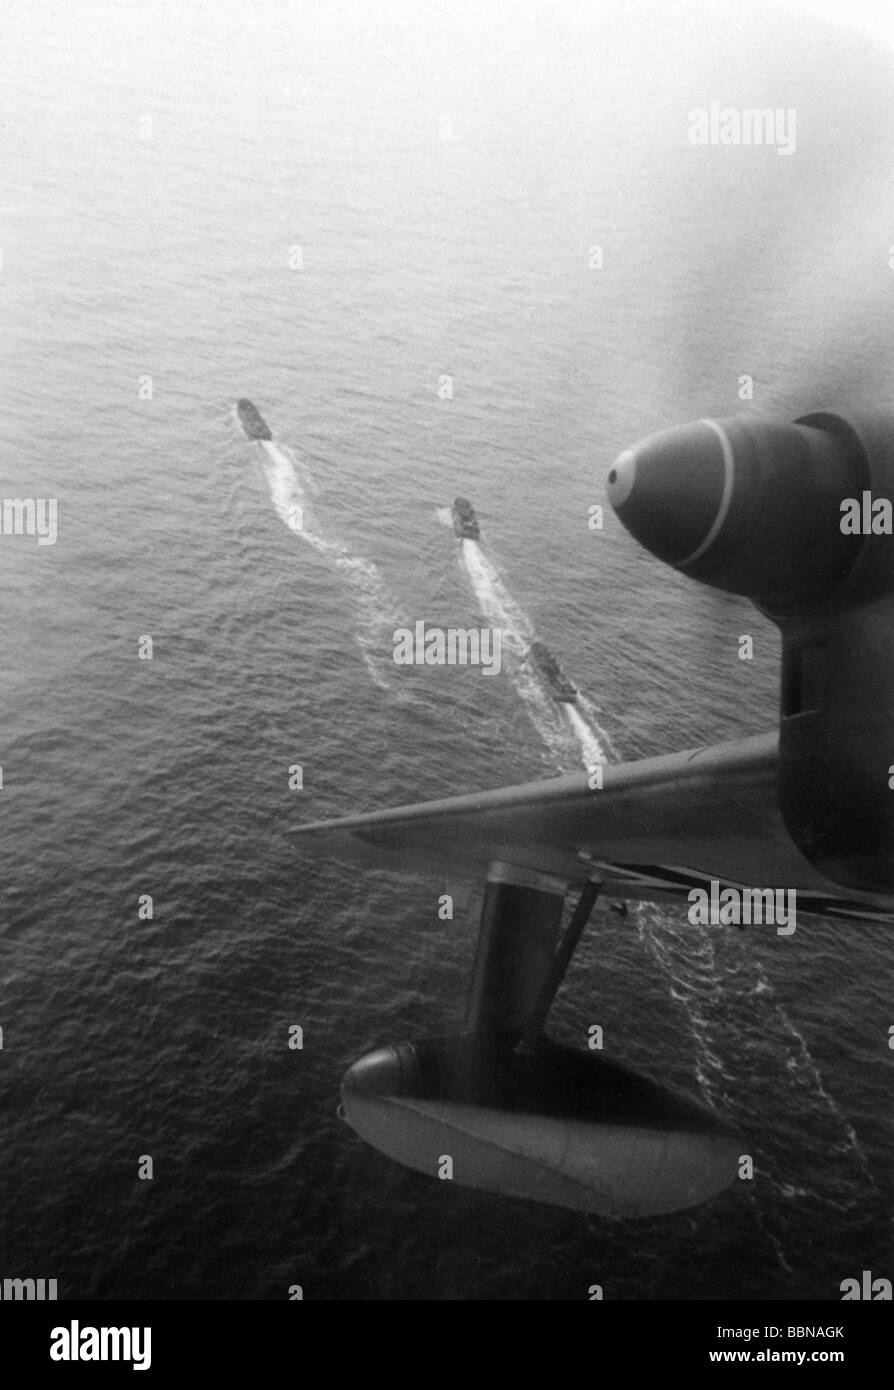 events, Second World War / WWII, Russia 1944 / 1945, Crimea, evacuation of Sevastopol, Kriegsmarine fast attack craft escorting a convoy, early May 1944, aerial photo, taken from a flying boat Blohm & Voss BV 138, Eastern Front, USSR, Wehrmacht, retreat, transport, naval, sea, navy, Soviet Union, 20th century, historic, historical, ship, ships, vessel, escort vessels, Third Reich, torpedo boats, plane, planes, recce, long-range, BV138, BV-138, maritime reconnaissance aircraft, wing, engine, 1940s, Stock Photo